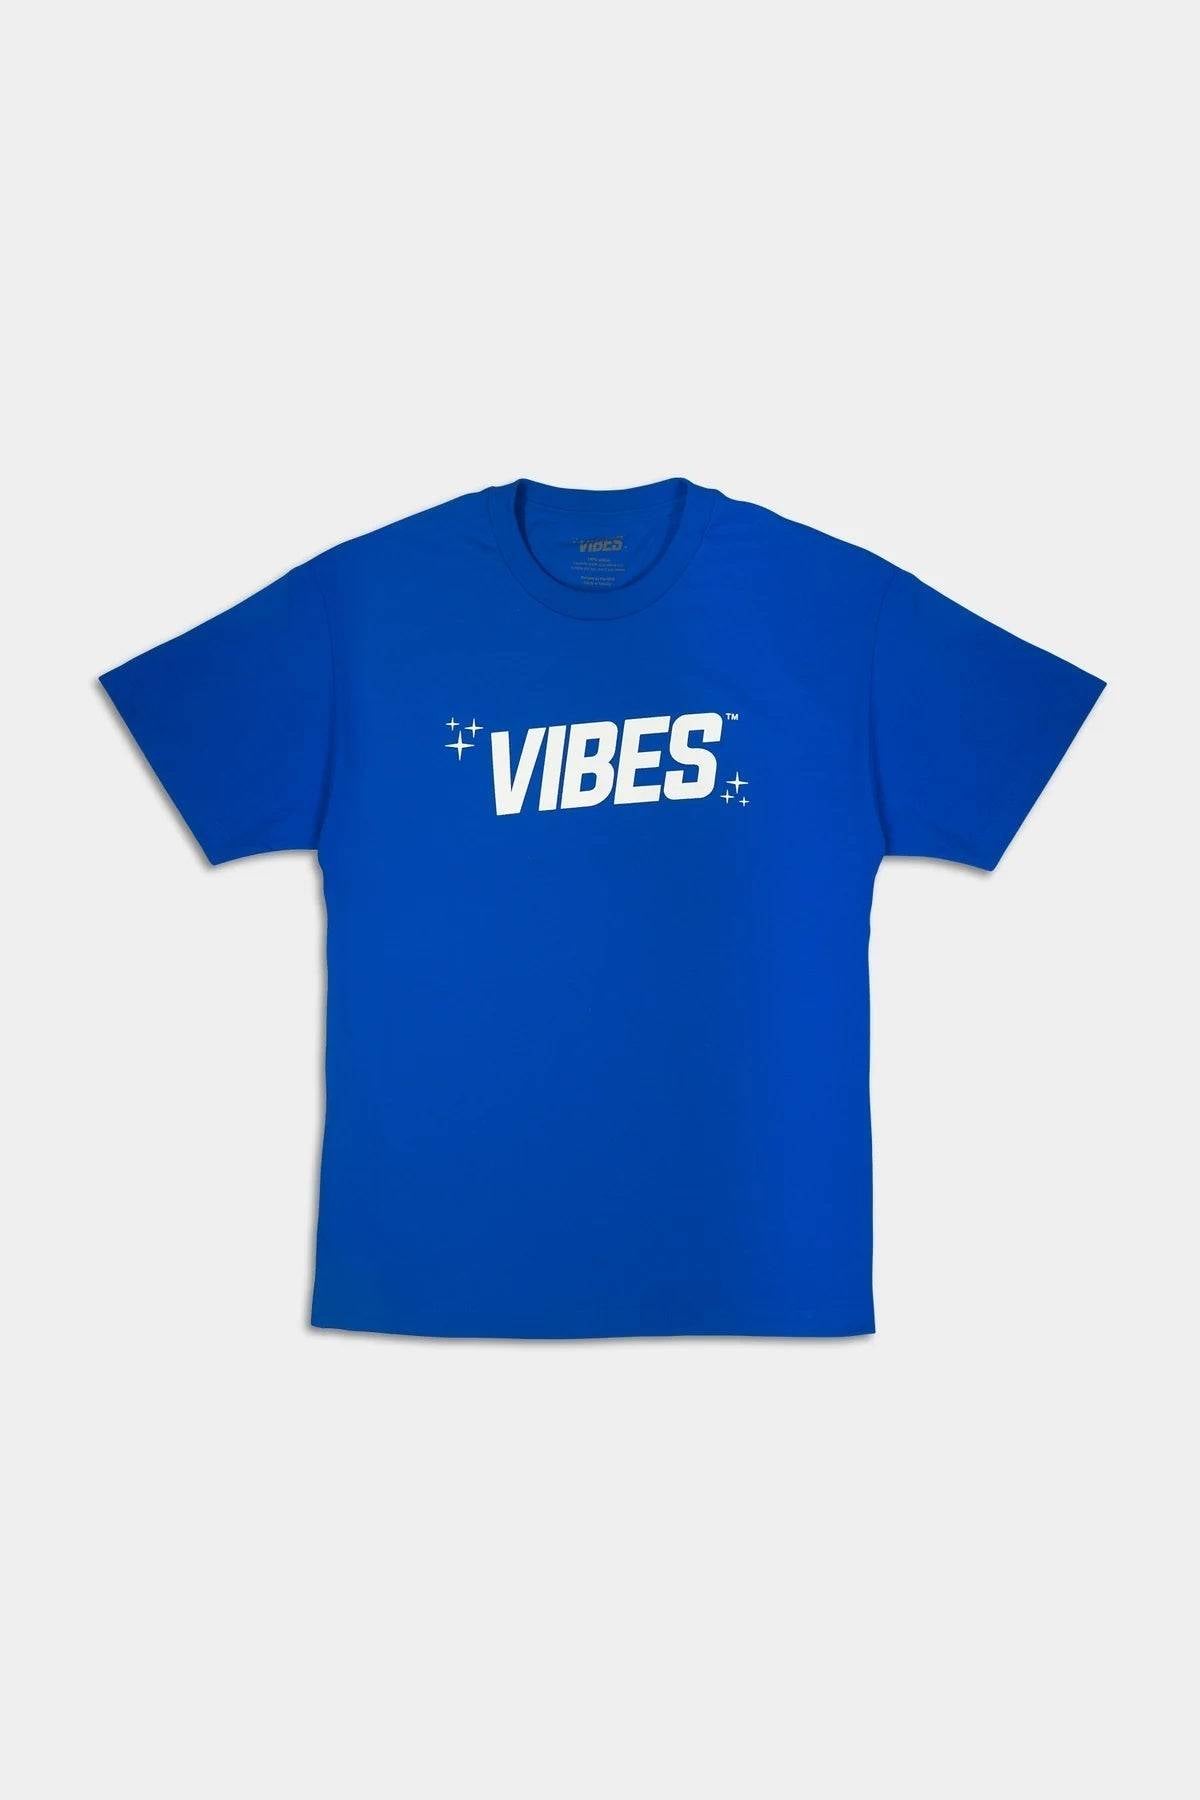 VIBES Blue With White Logo T-Shirt Large